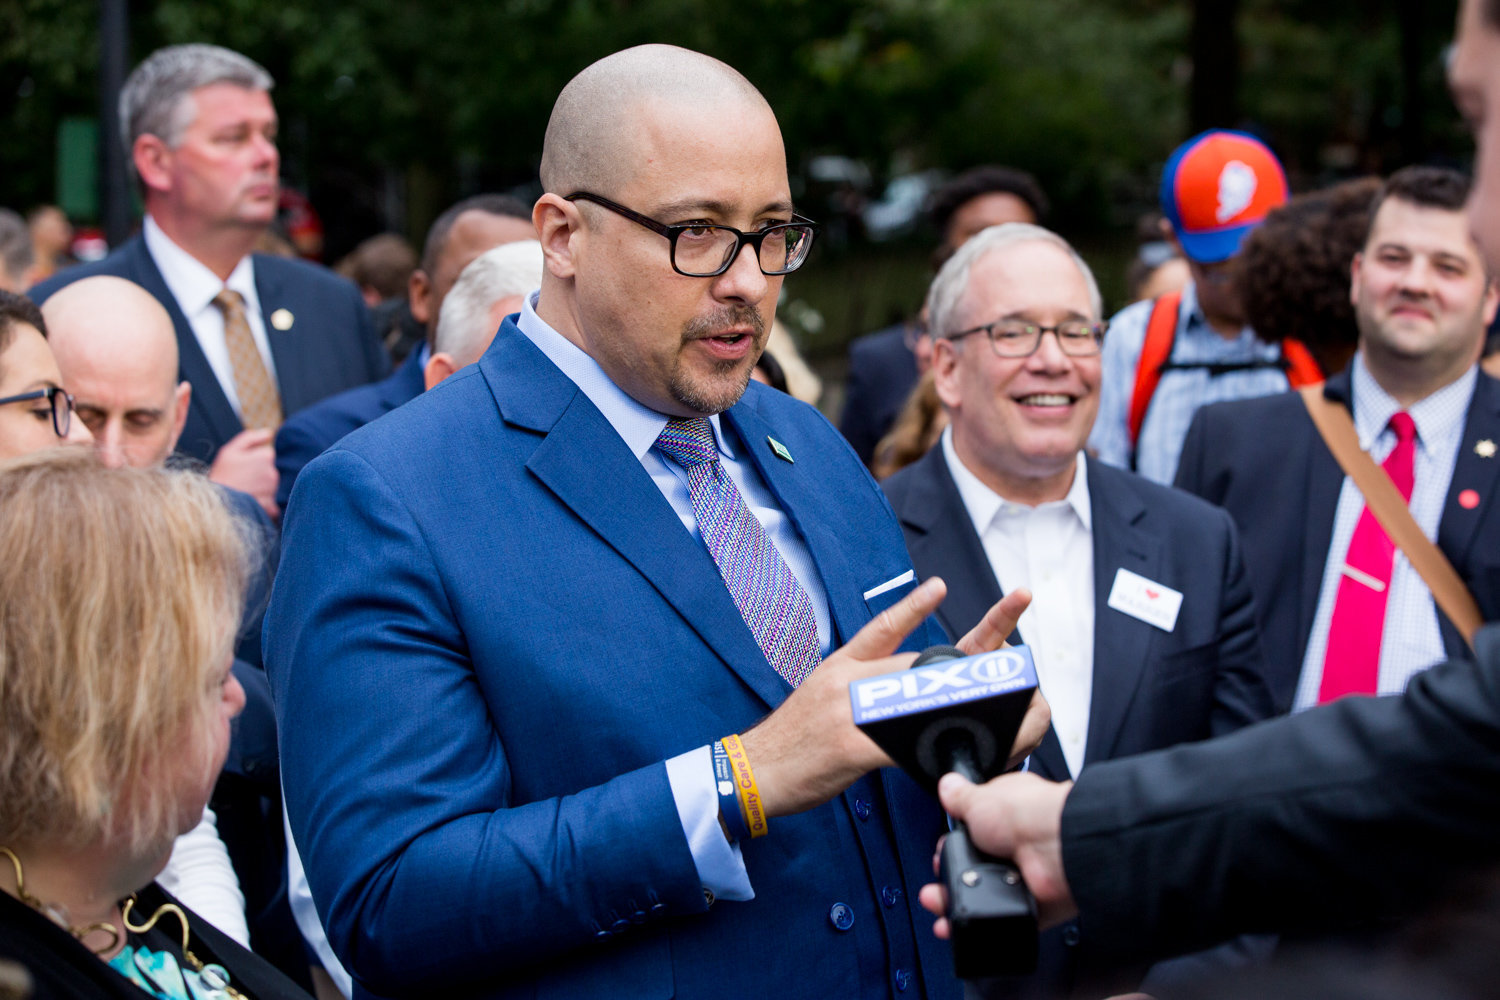 State Sen. Gustavo Rivera nearly lost what had been expected to be a routine endorsement from the Benjamin Franklin Reform Democratic Club just days after informing Assemblyman Jeffrey Dinowitz he was backing leadership change at the club.